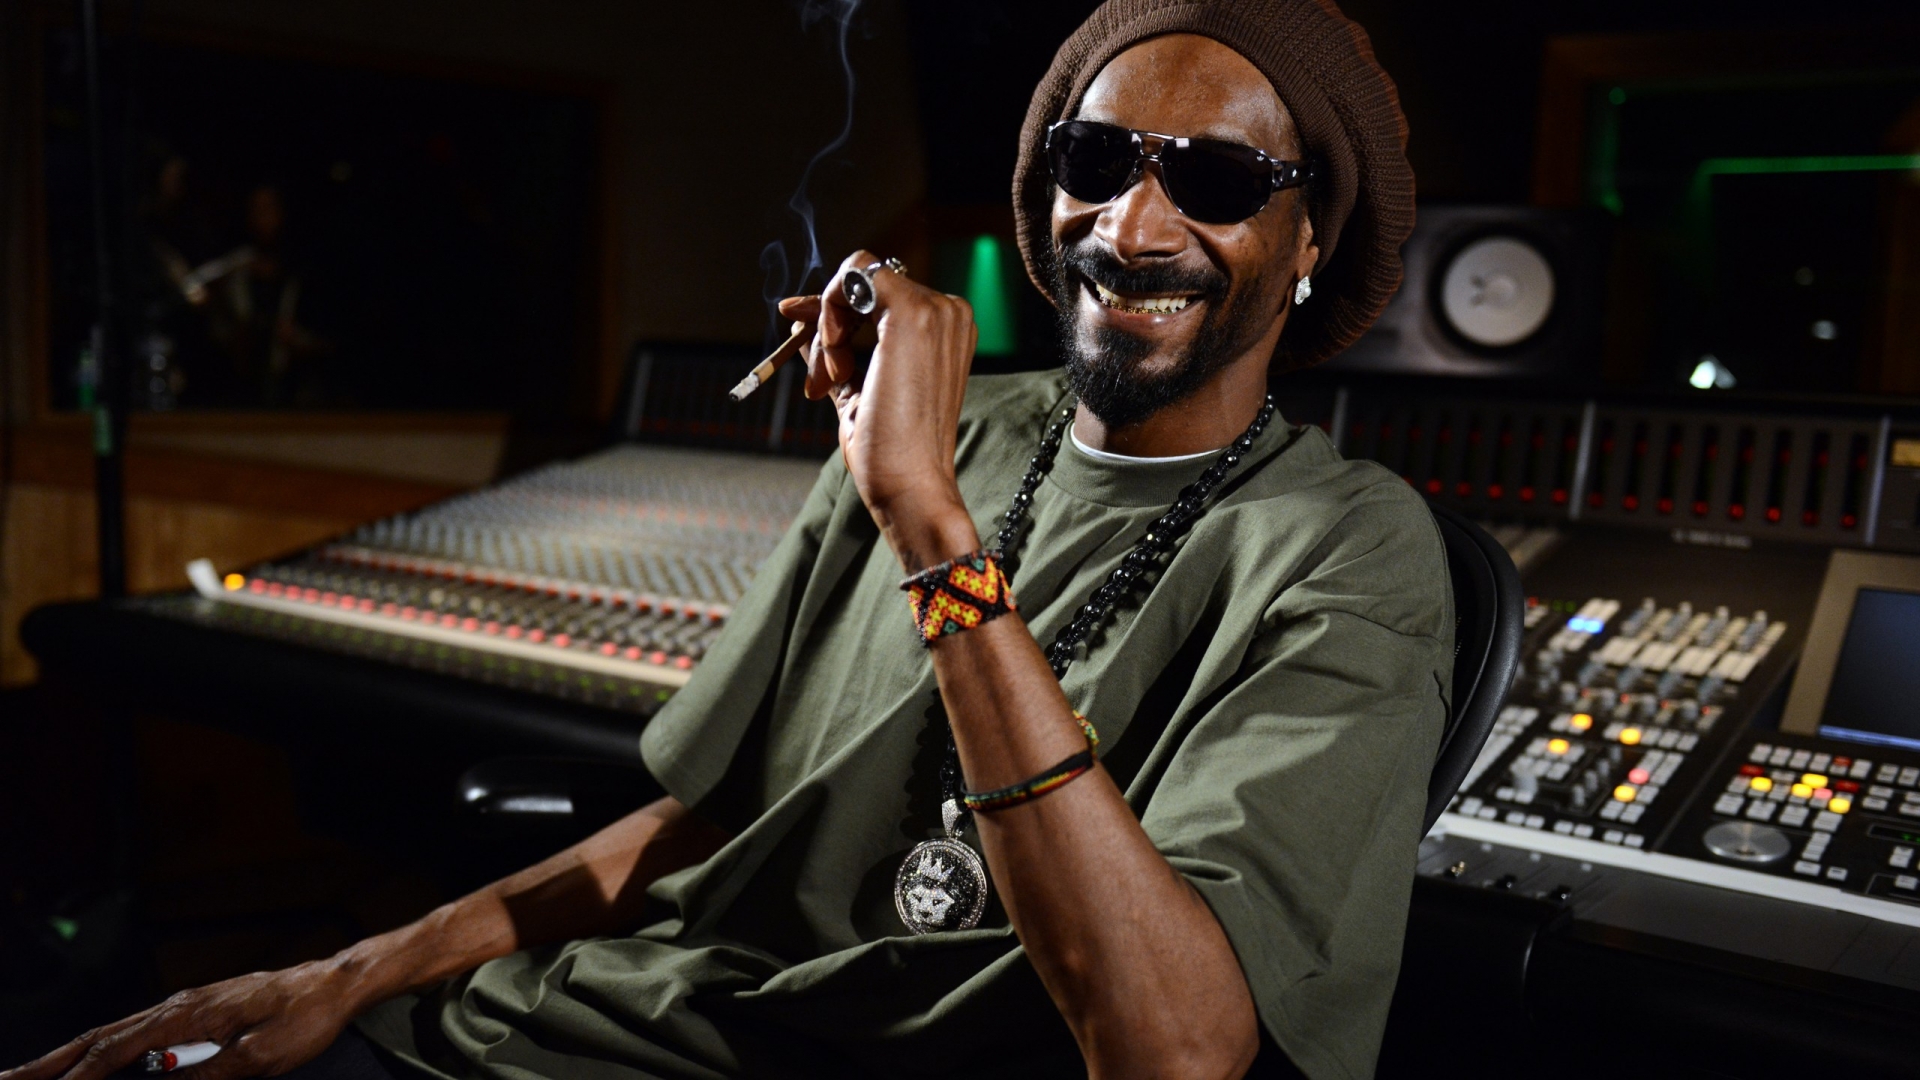 Snoop Dogg Smile for 1920 x 1080 HDTV 1080p resolution